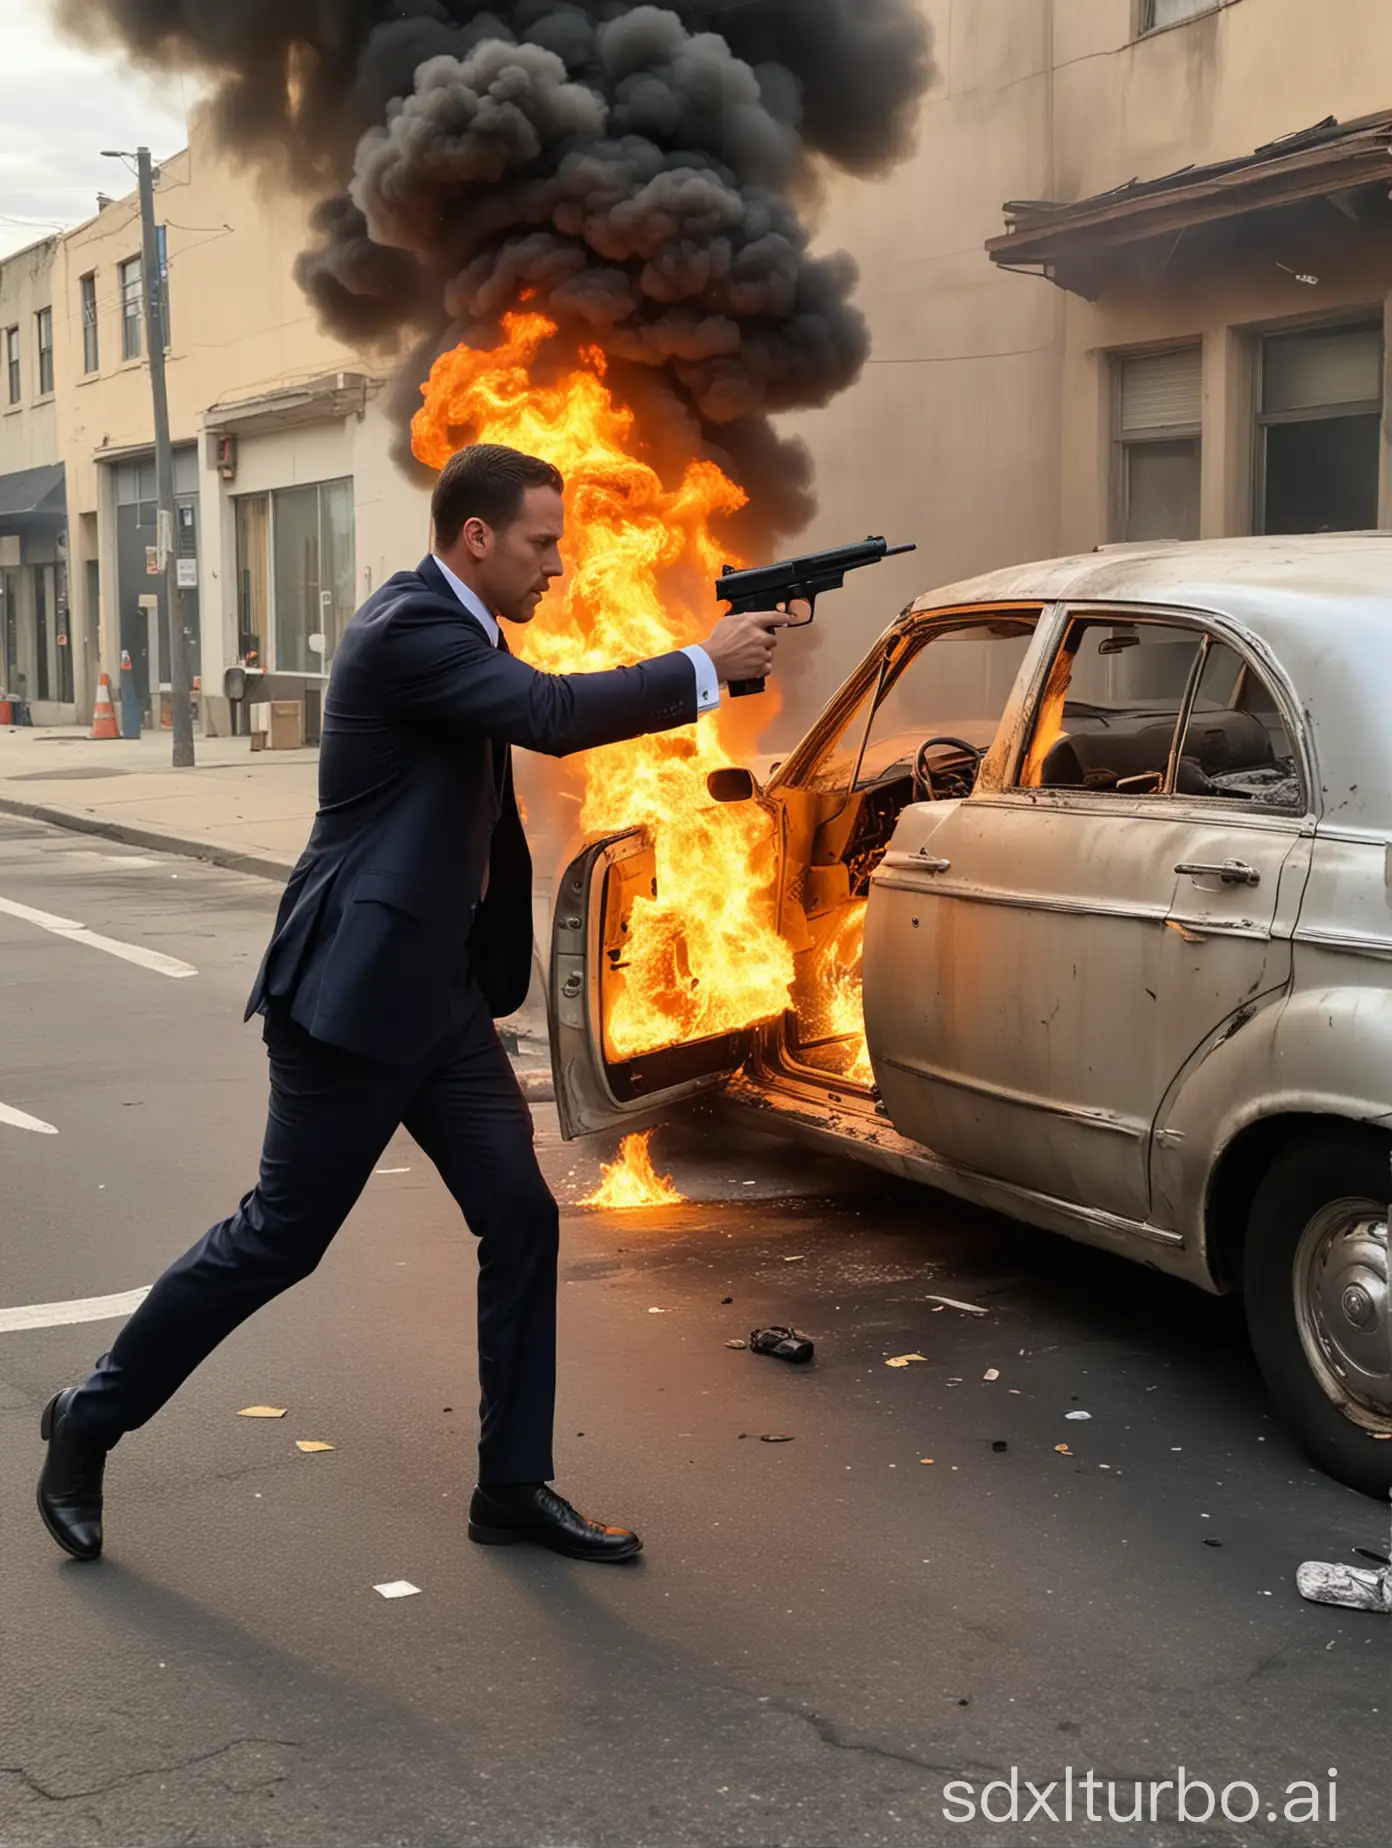 1 man in a suit gets out of 1 car with 1 weapon in hand behind him is 1 burning building